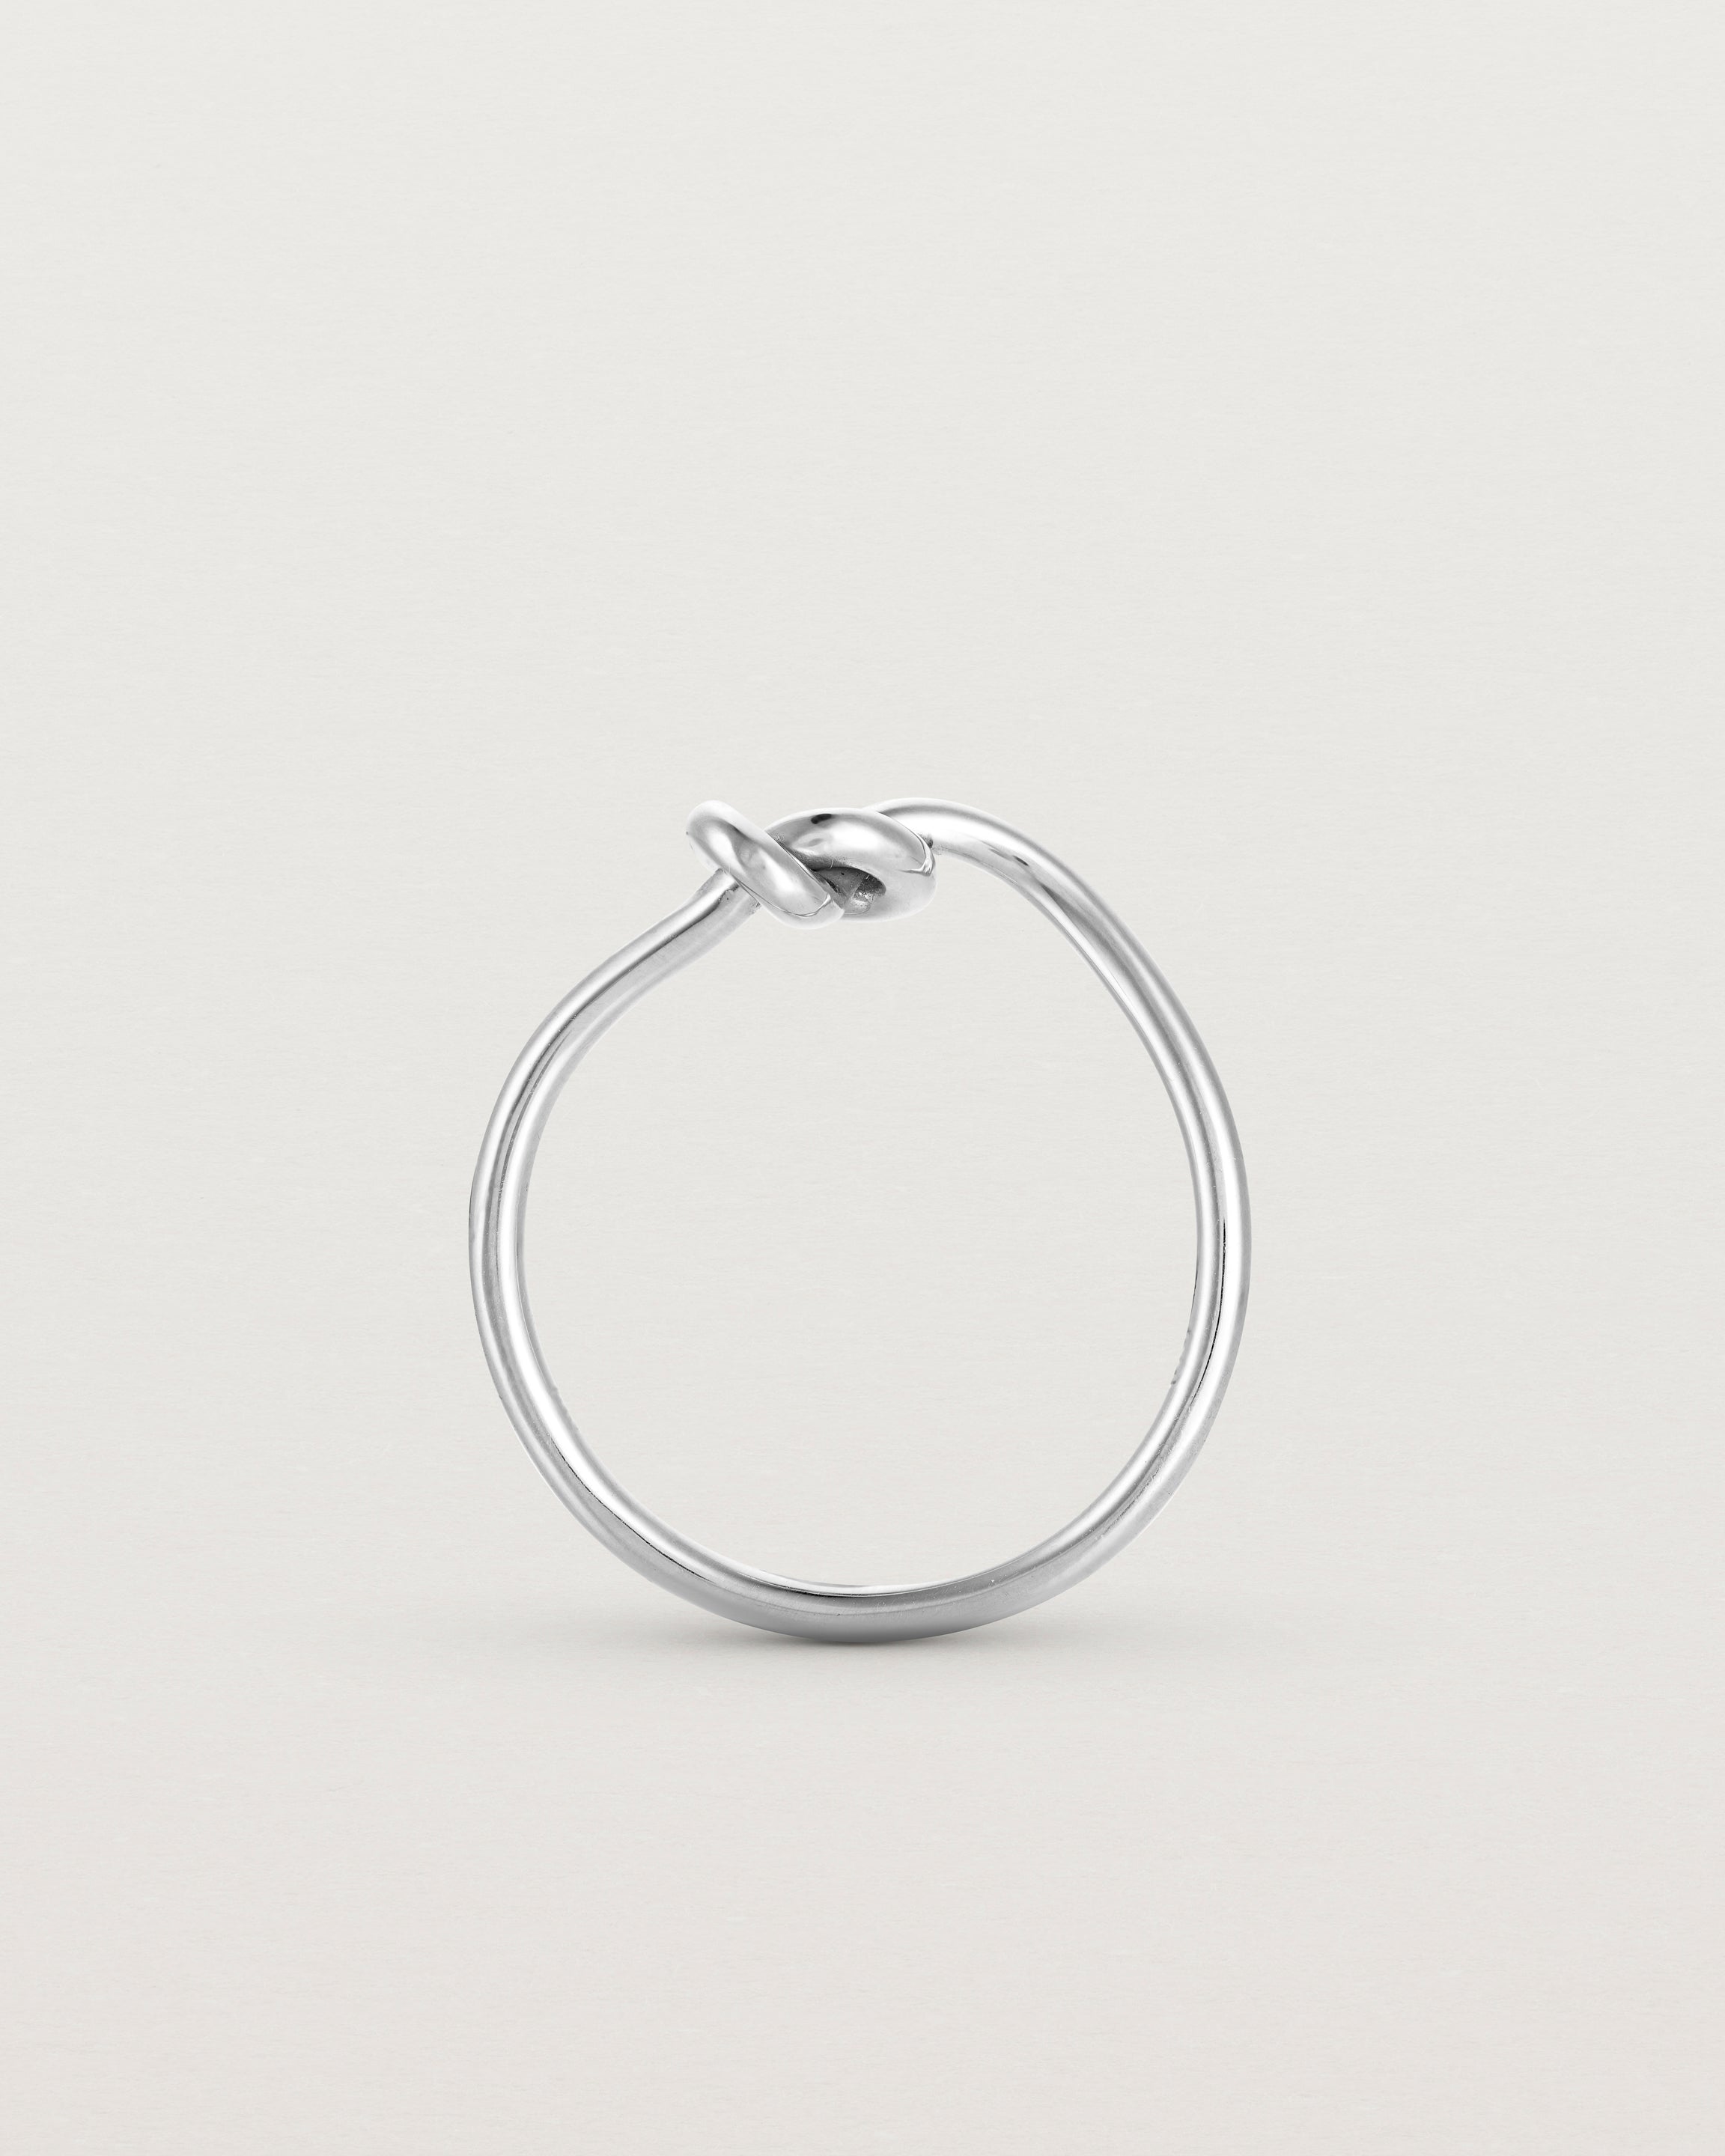 Standing view of the Cara Ring in sterling silver.